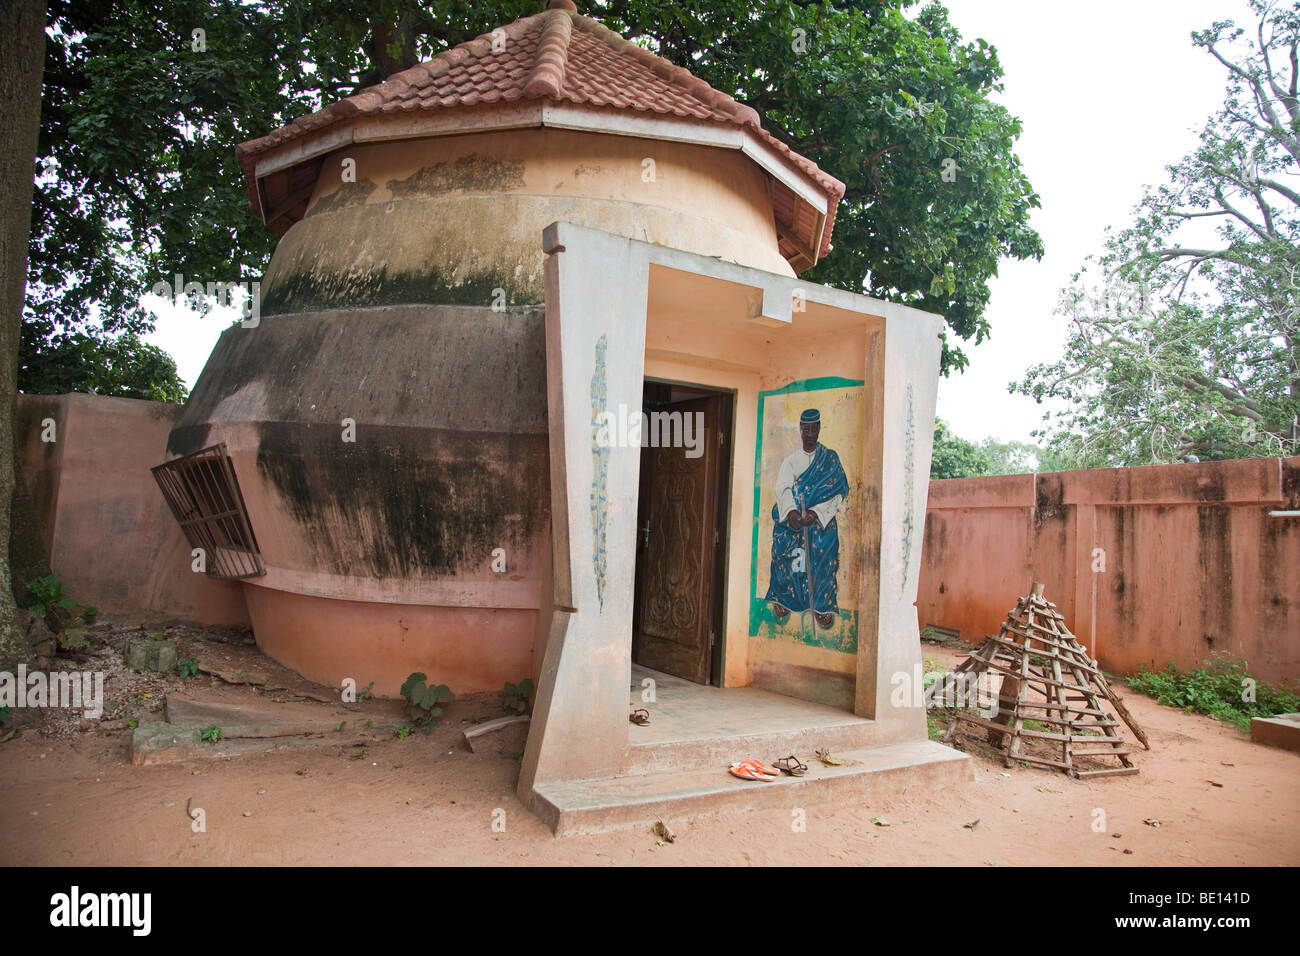 The Temple of Pythons in Ouidah, Benin is a small room housing 50 or so royal pythons. Stock Photo